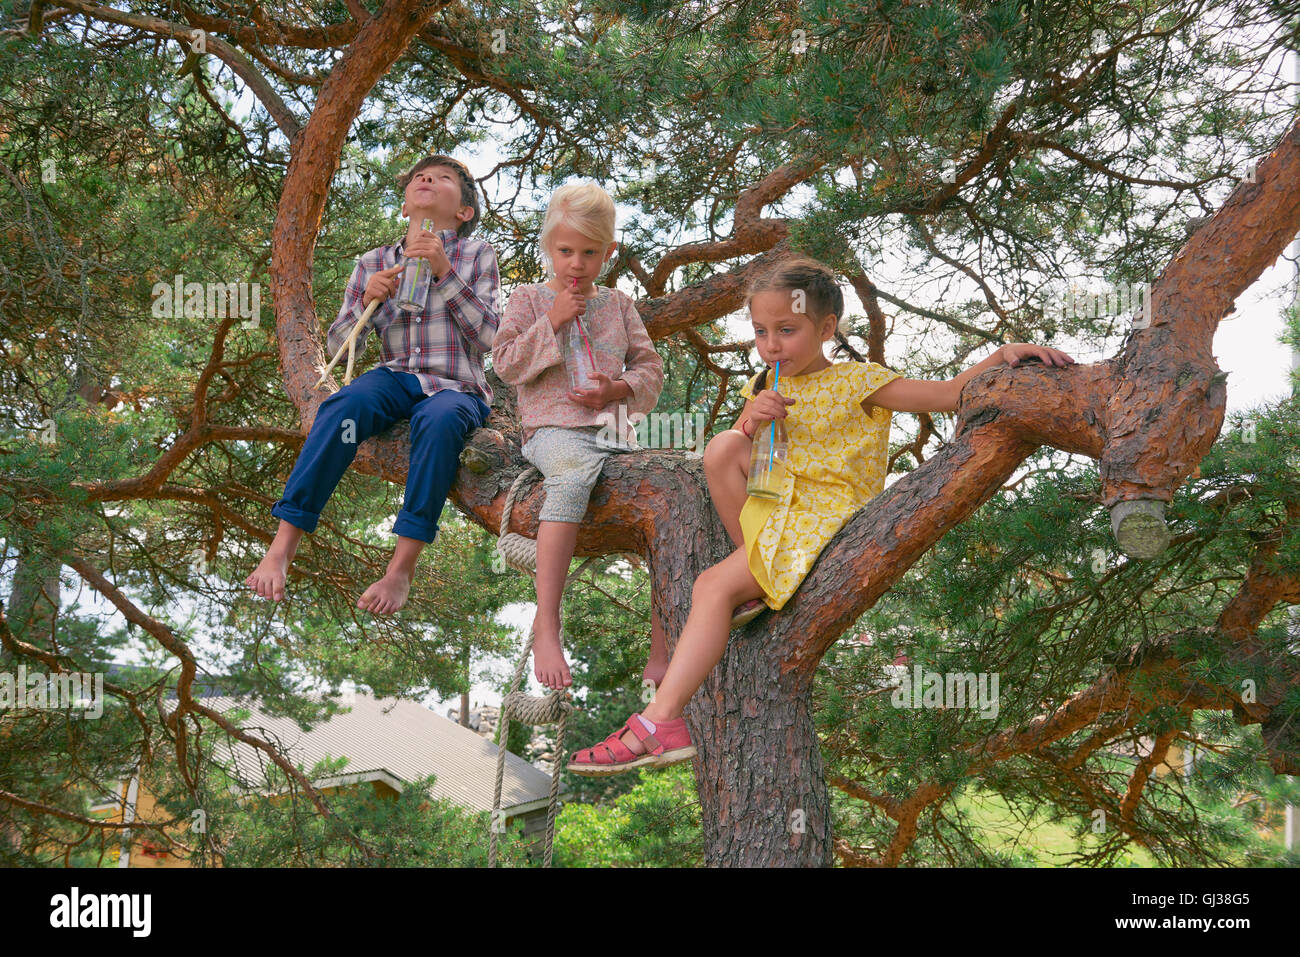 Group of young friends sitting in tree, drinking bottled drinks Stock Photo